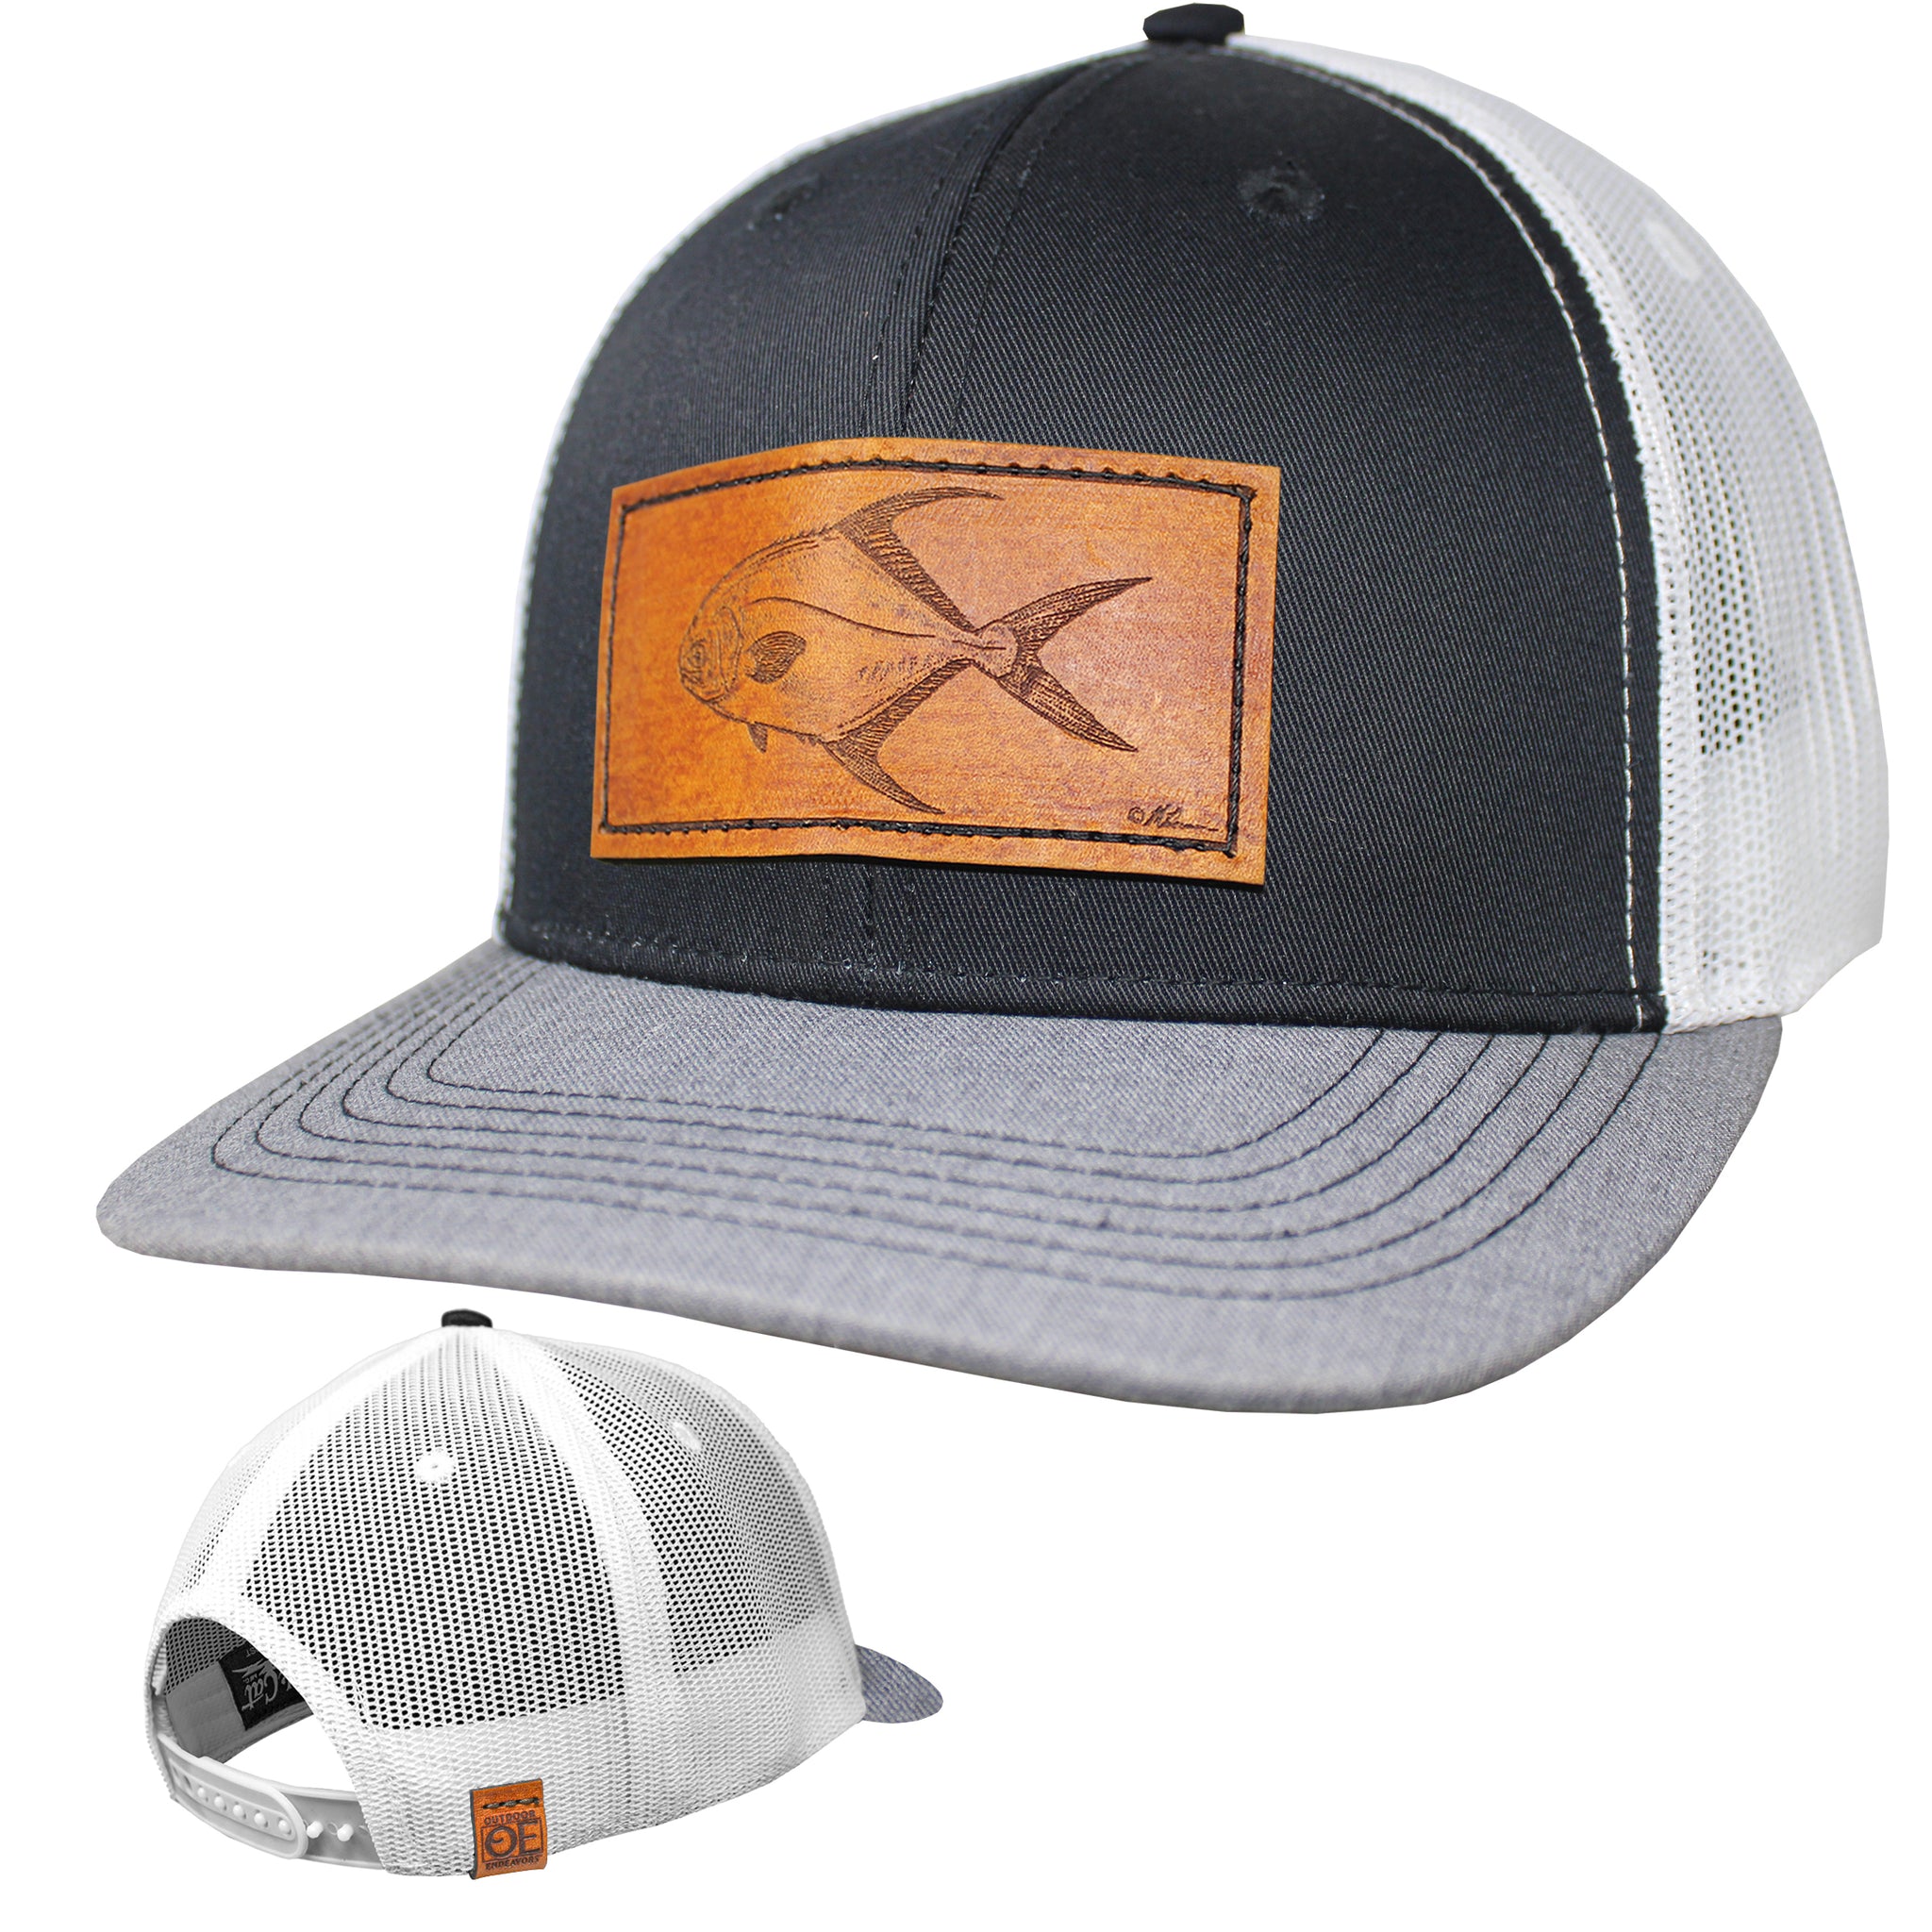 OE - Performance Trucker Hat - Permit Leather Patch